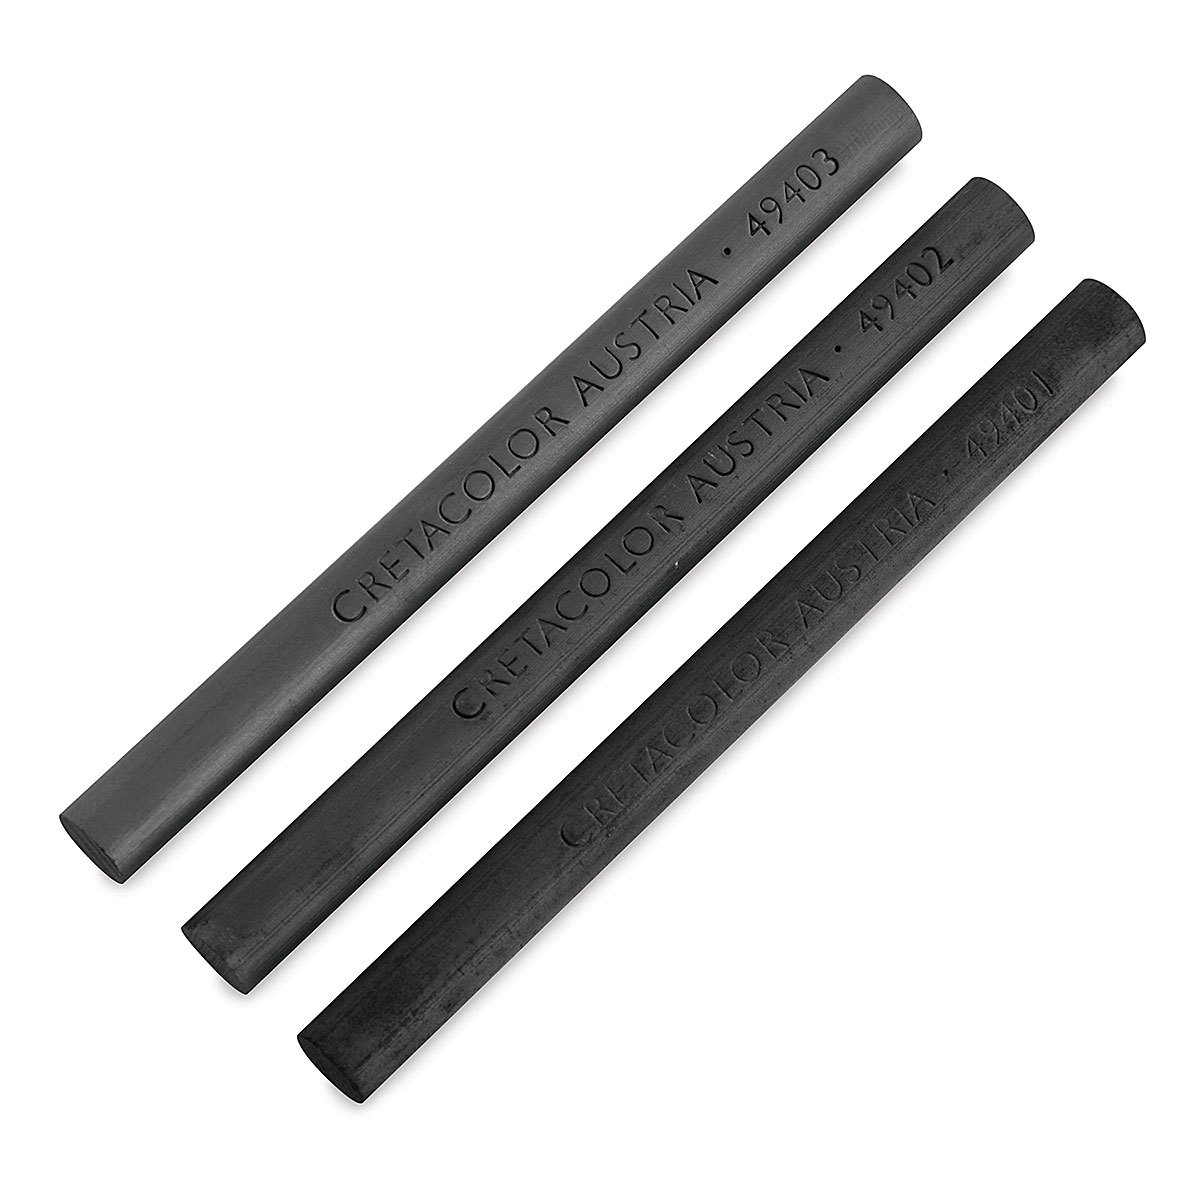 Pro Art Charcoal Compressed Charcoal Sticks, dark grey, for